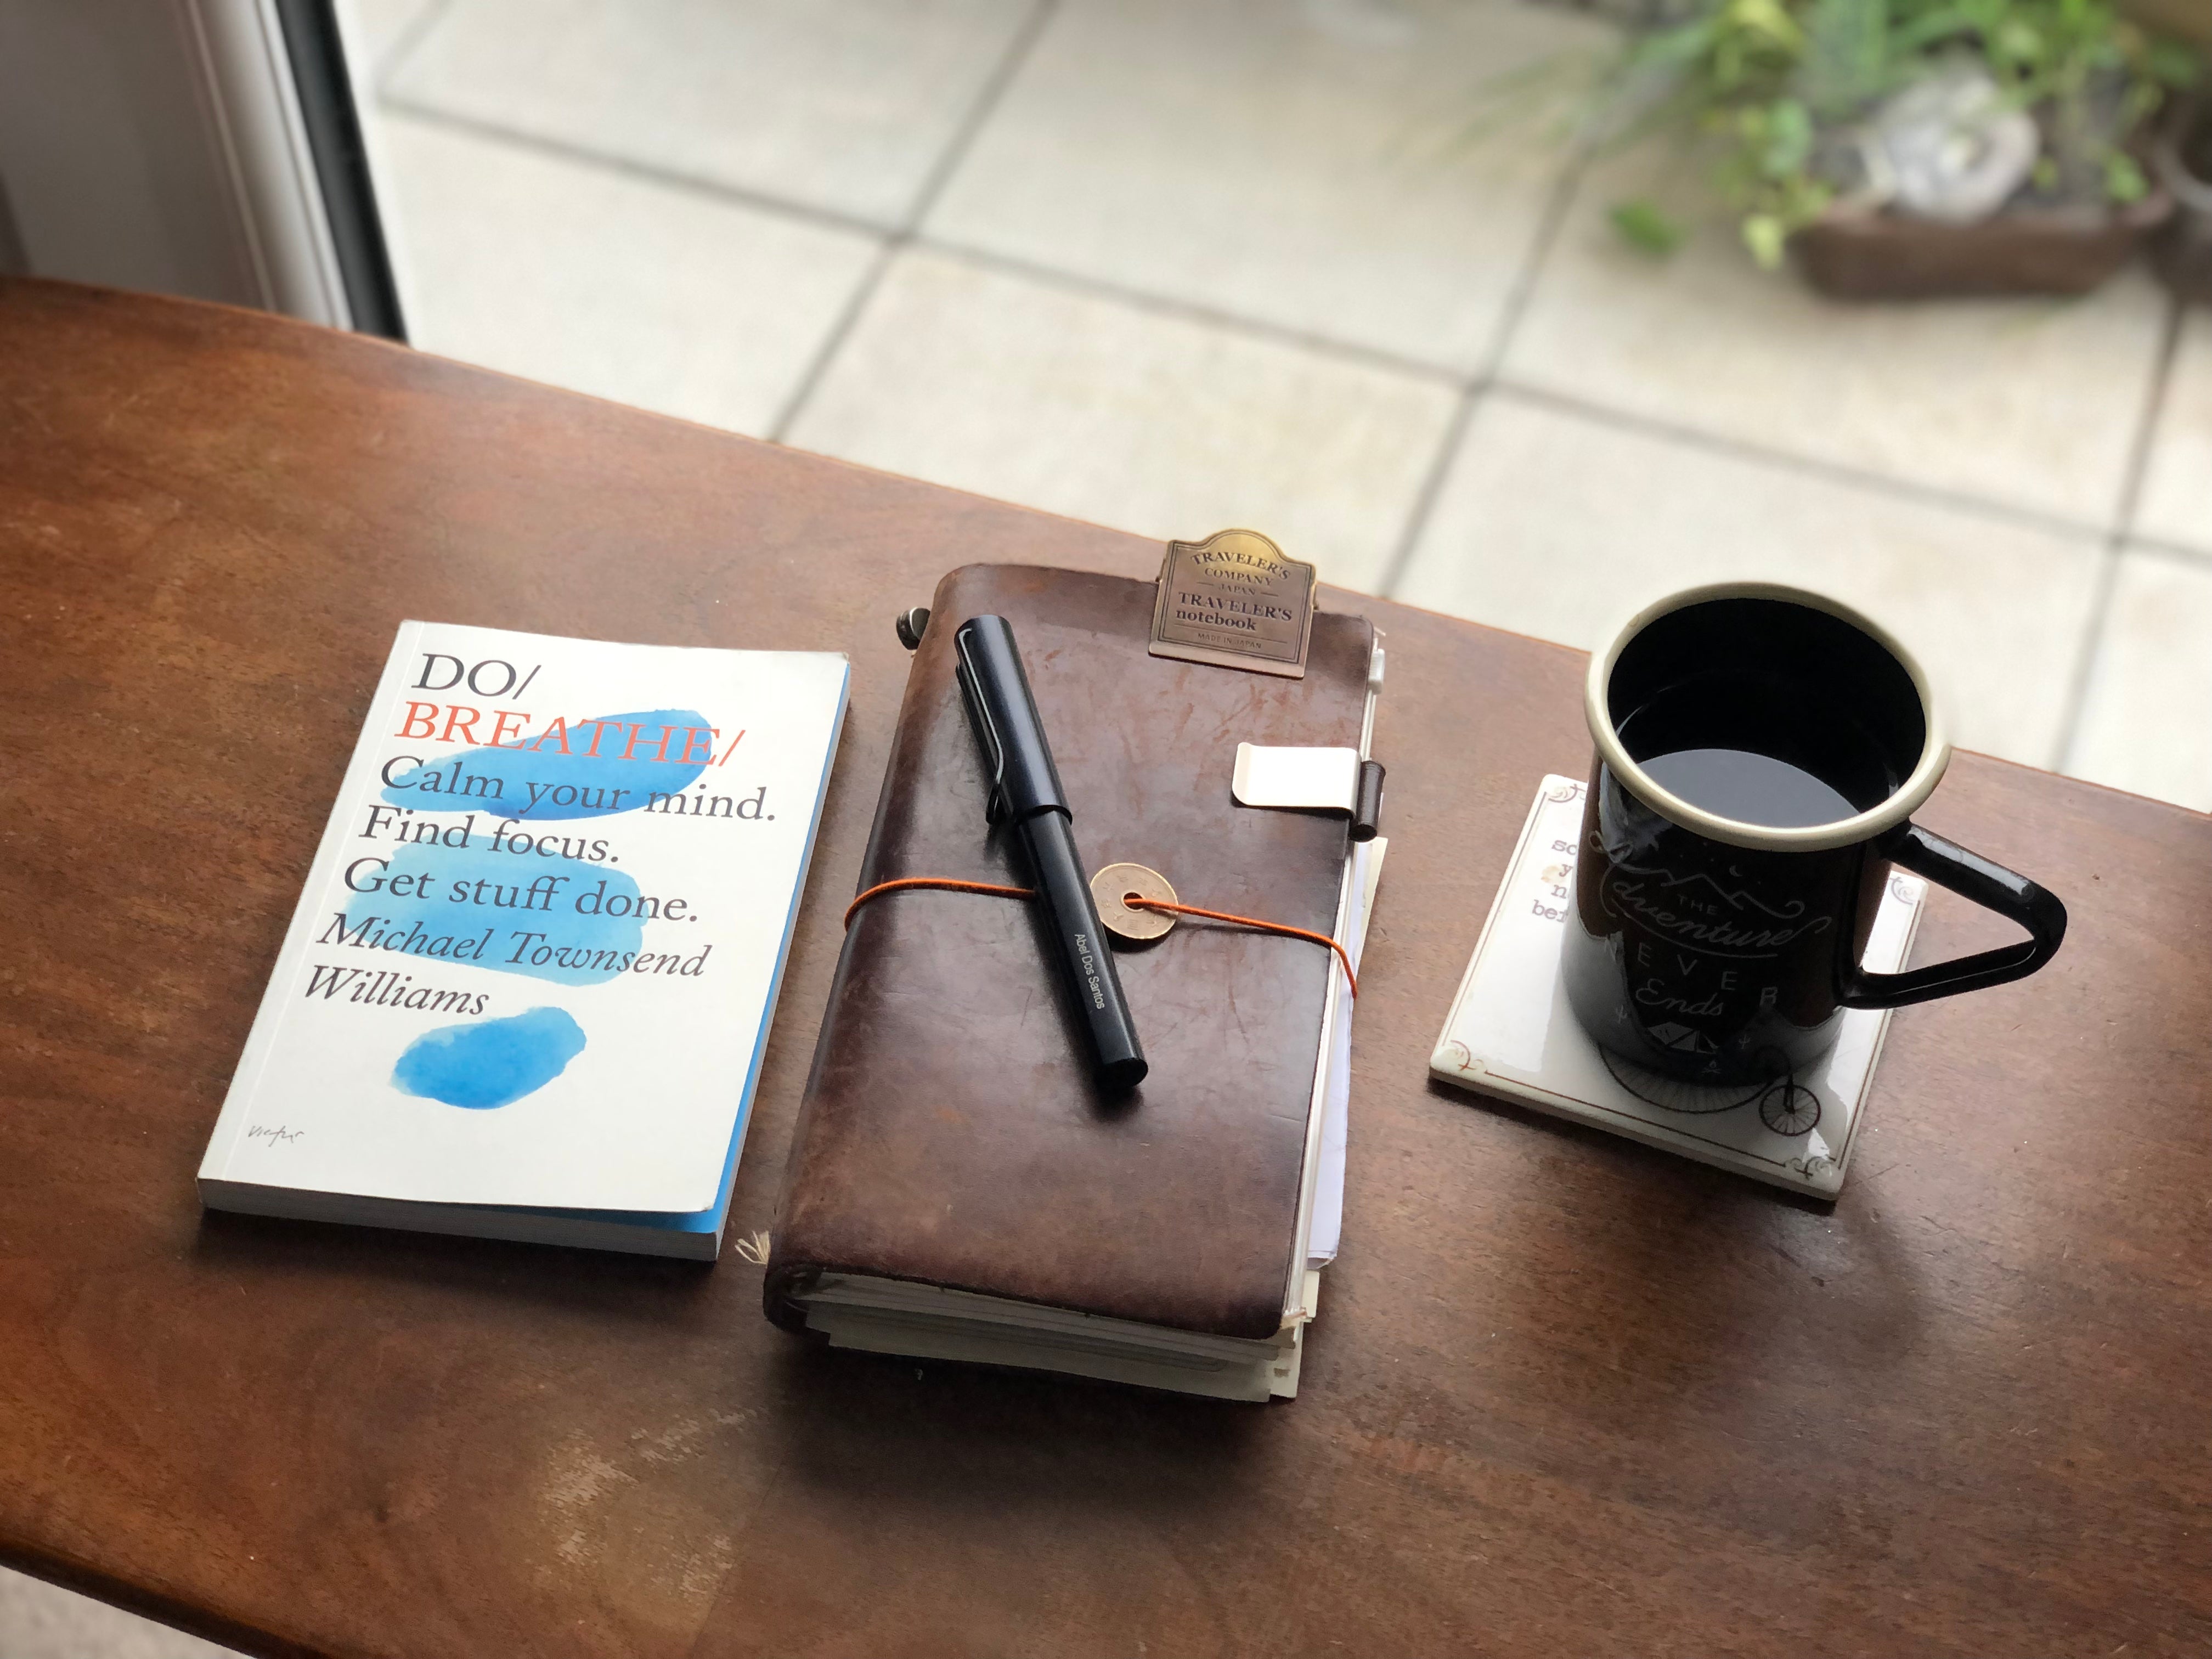 Traveler's Notebook Brown with Do Breathe book and Black coffee cup